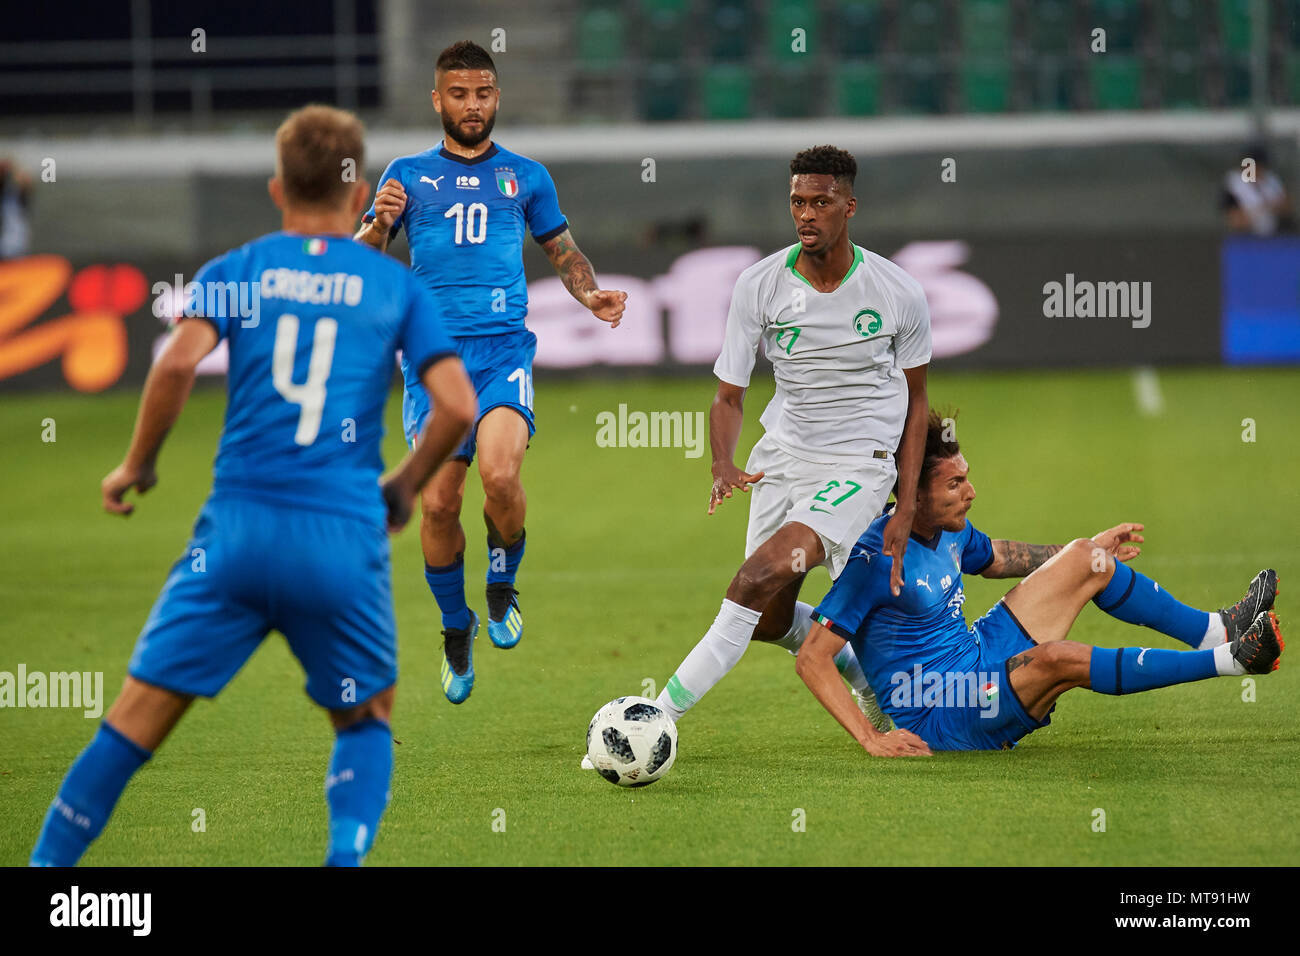 St. Gallen, Switzerland. 28th May 2018. Mohamed Kanno during the football World Cup 2018 preparation match Italy vs. Saudi Arabia in St. Gallen. The national team from Saudi Arabia is using the game to prepare for the 2018 FIFA World Cup final tournament in Russia while Italy did not qualify for the World Cup finals. Stock Photo